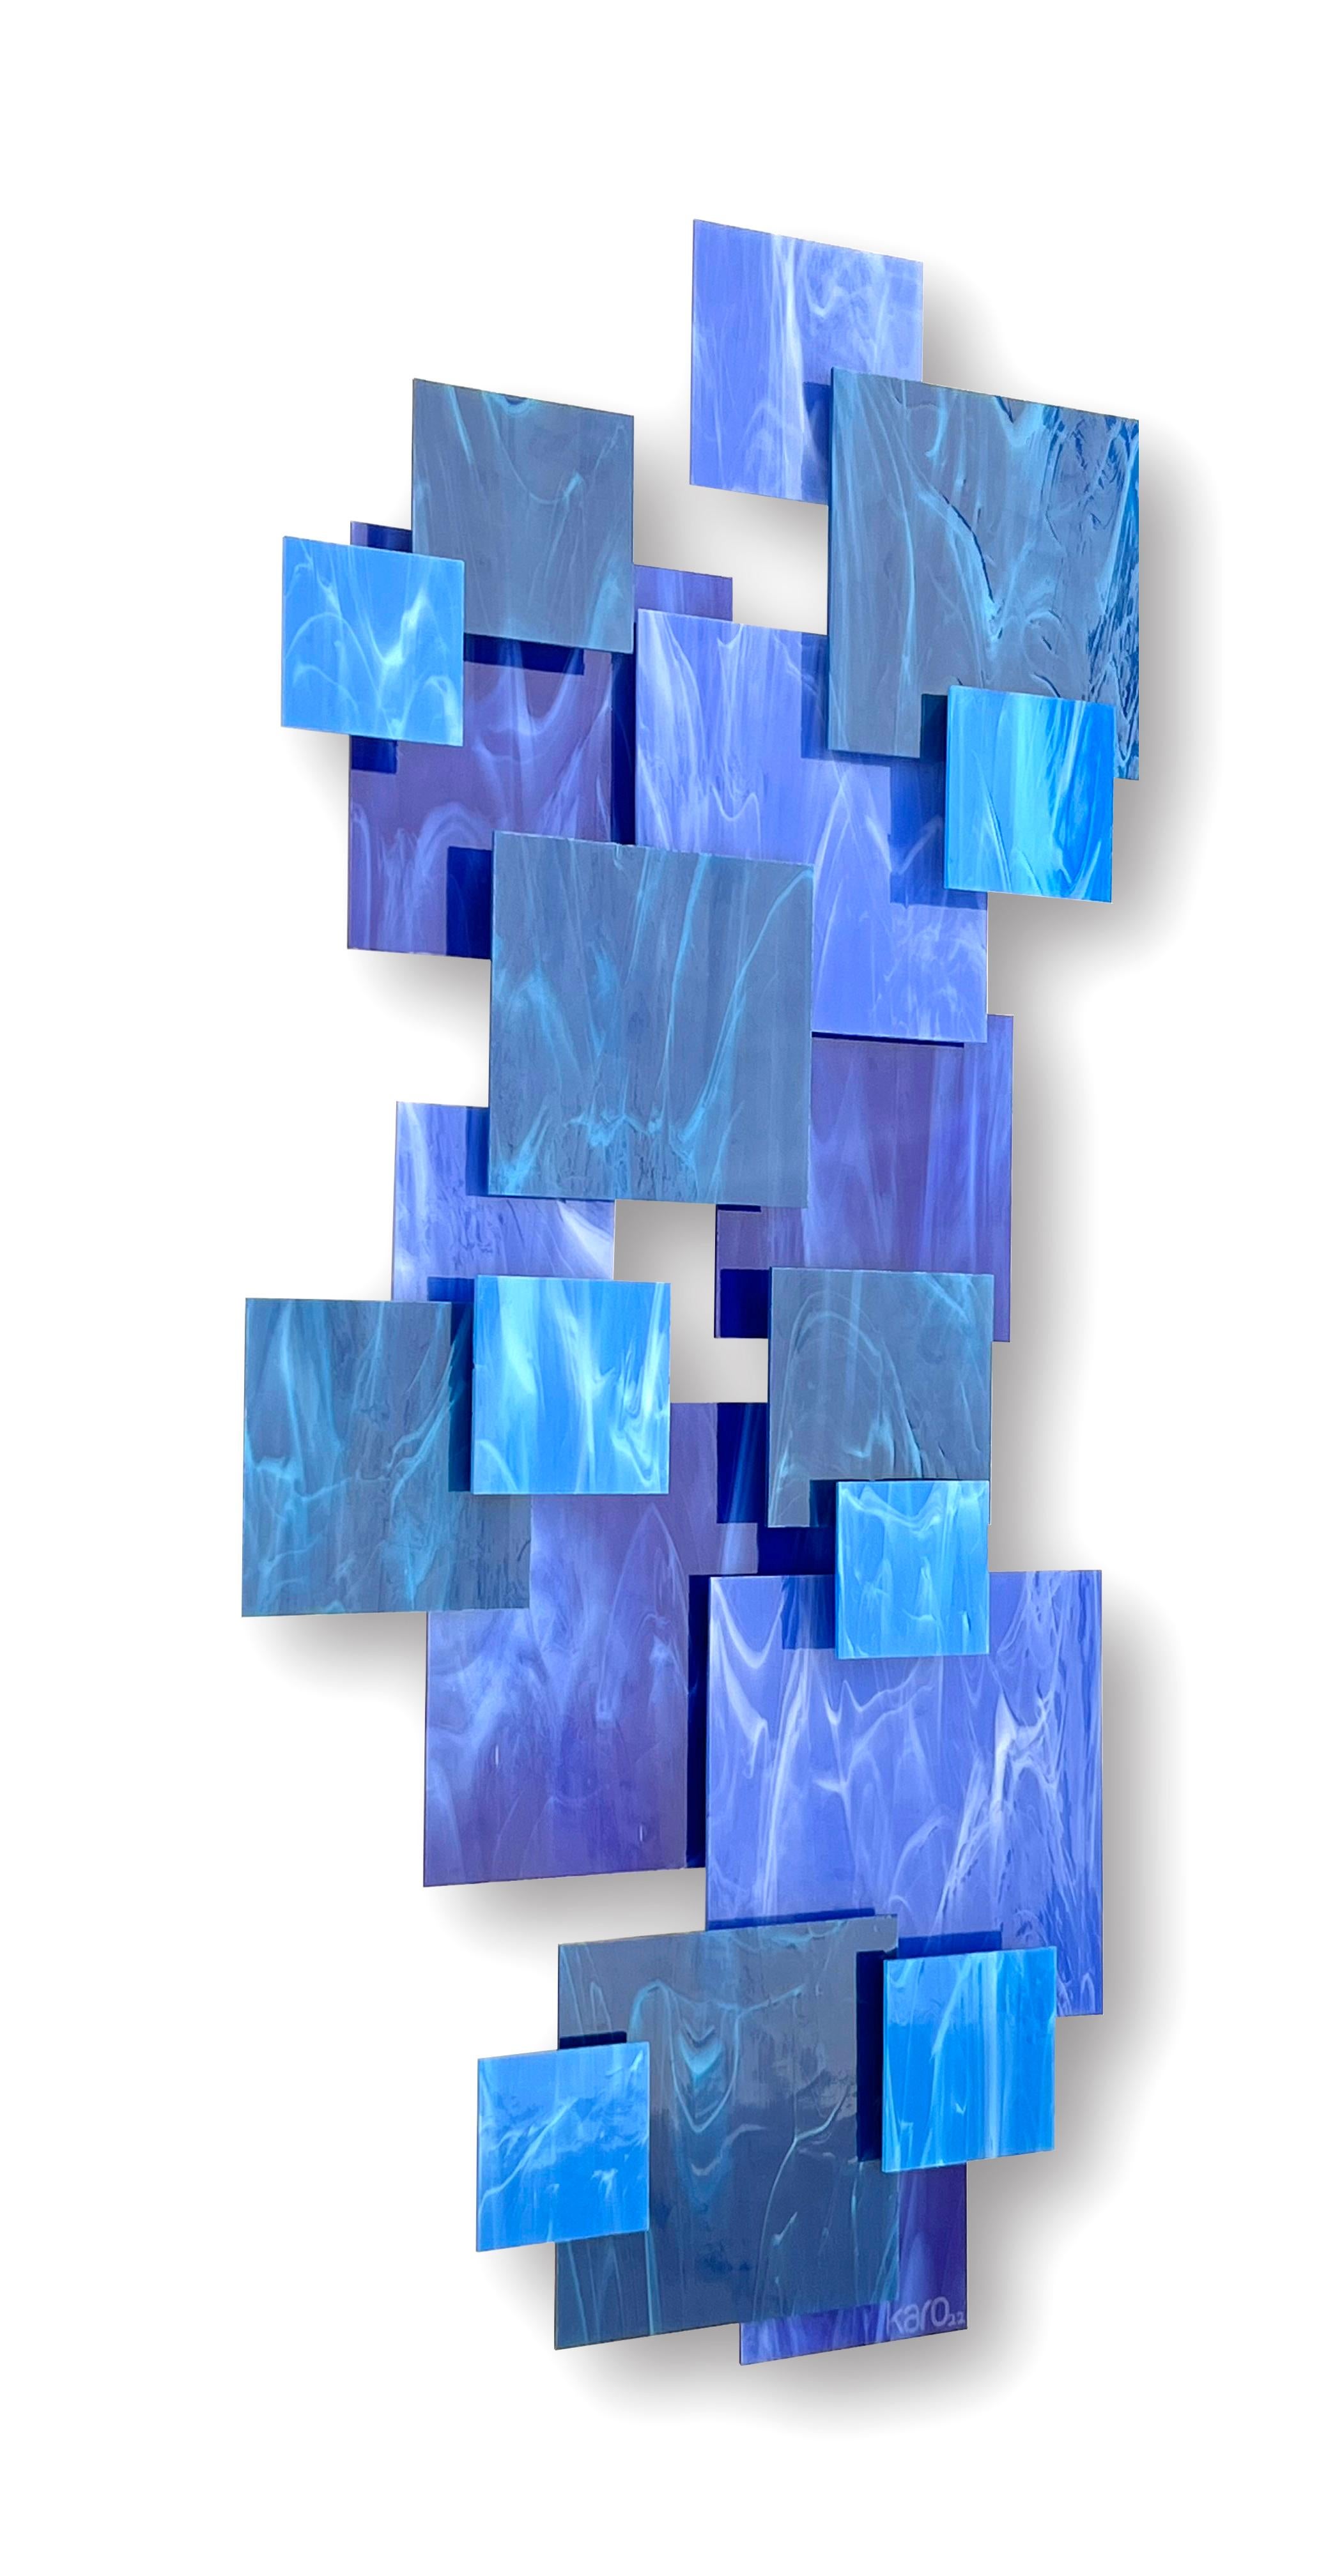 Individual pieces of glass are hand cut and placed over a welded metal frame on different elevations to create a 3D dynamic and harmonious composition. Each piece is hand created by the artist Karo Martirosyan in his studio in Los Angeles. With a